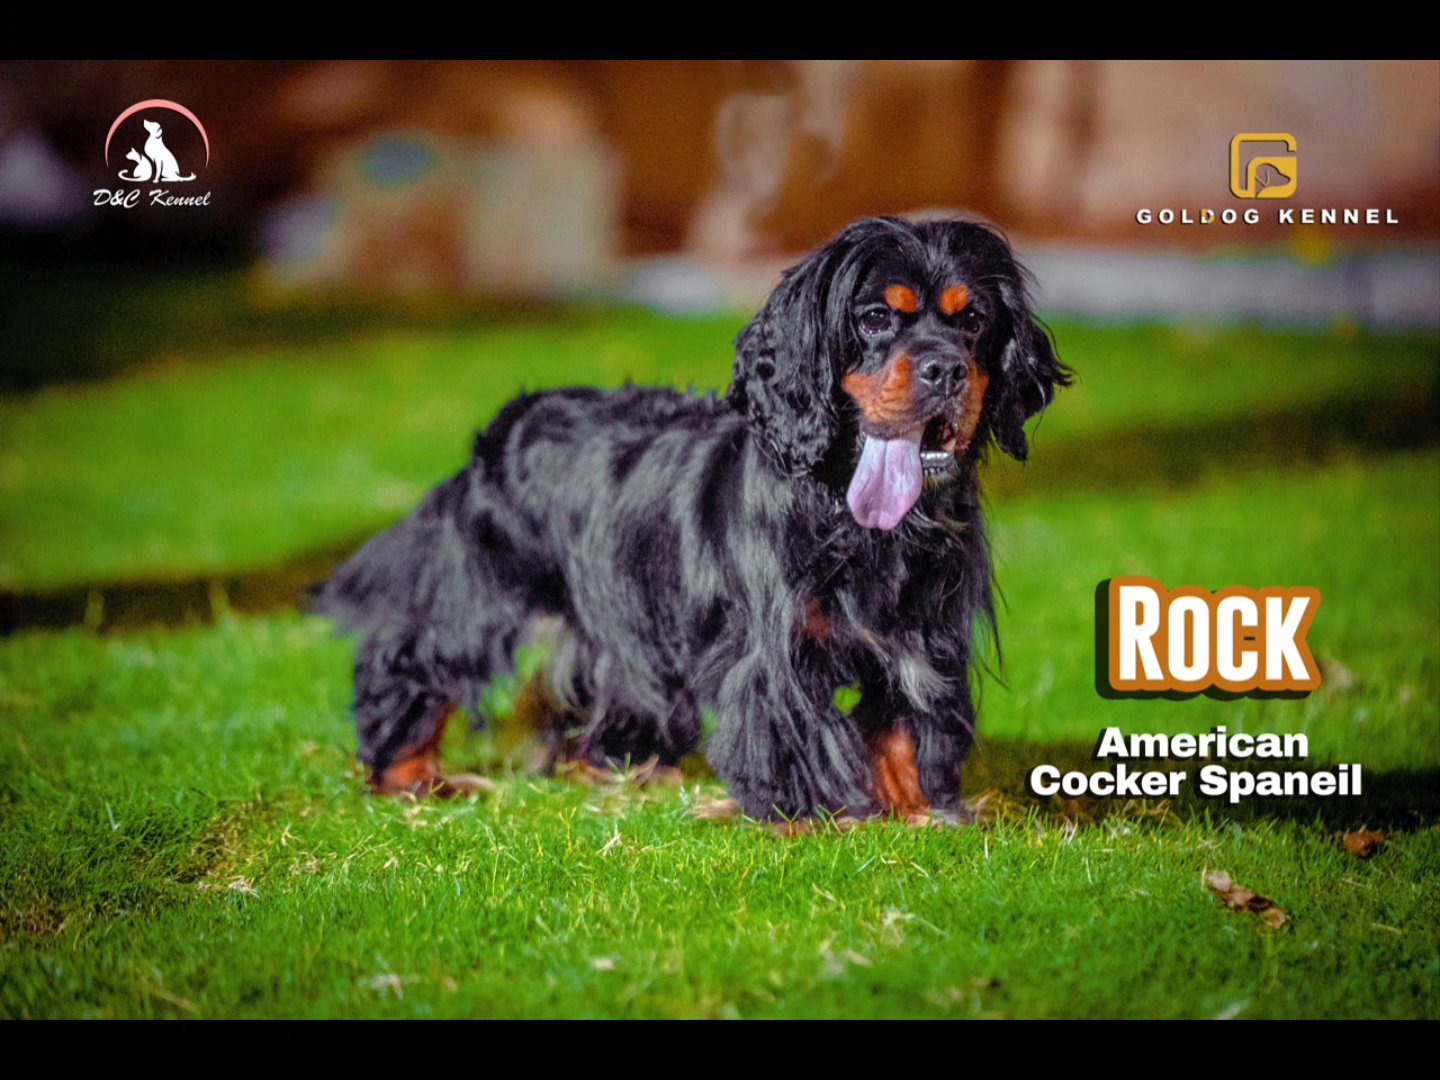 Rock the Male American Cocker Spaniel for Mating in Sharjah